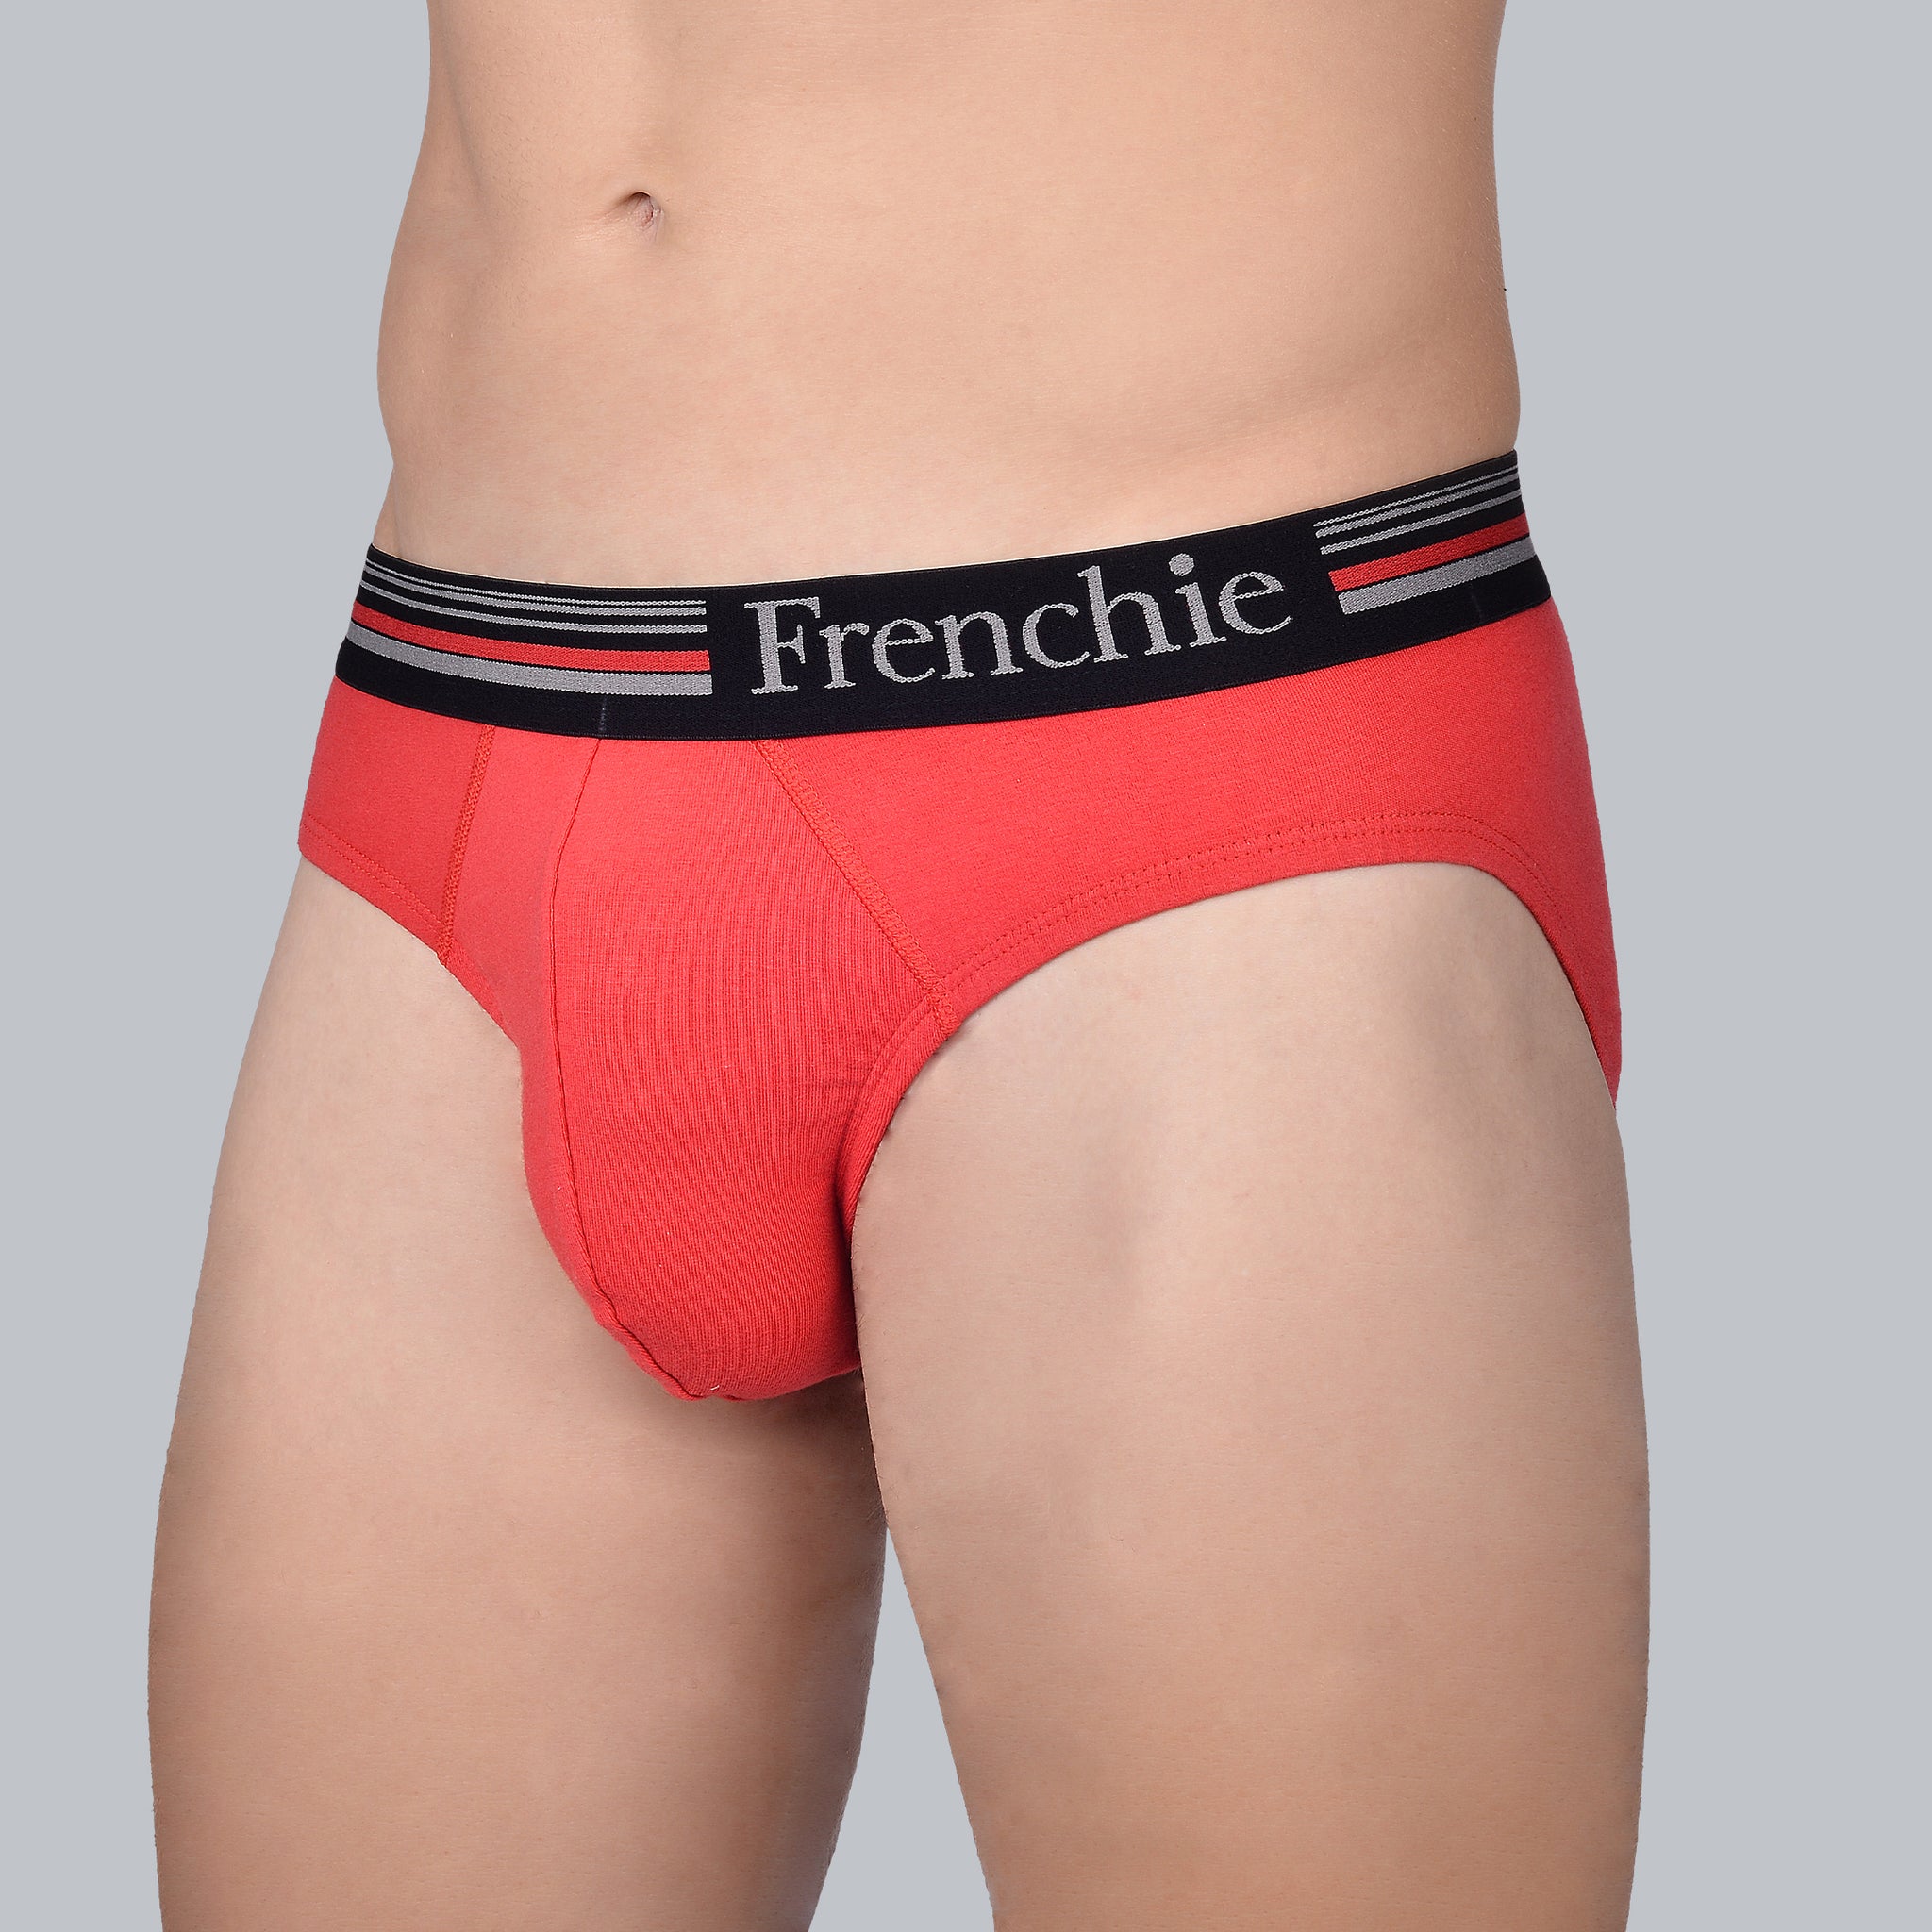 Frenchie Mens Casual-4000 Brief Assorted Colors